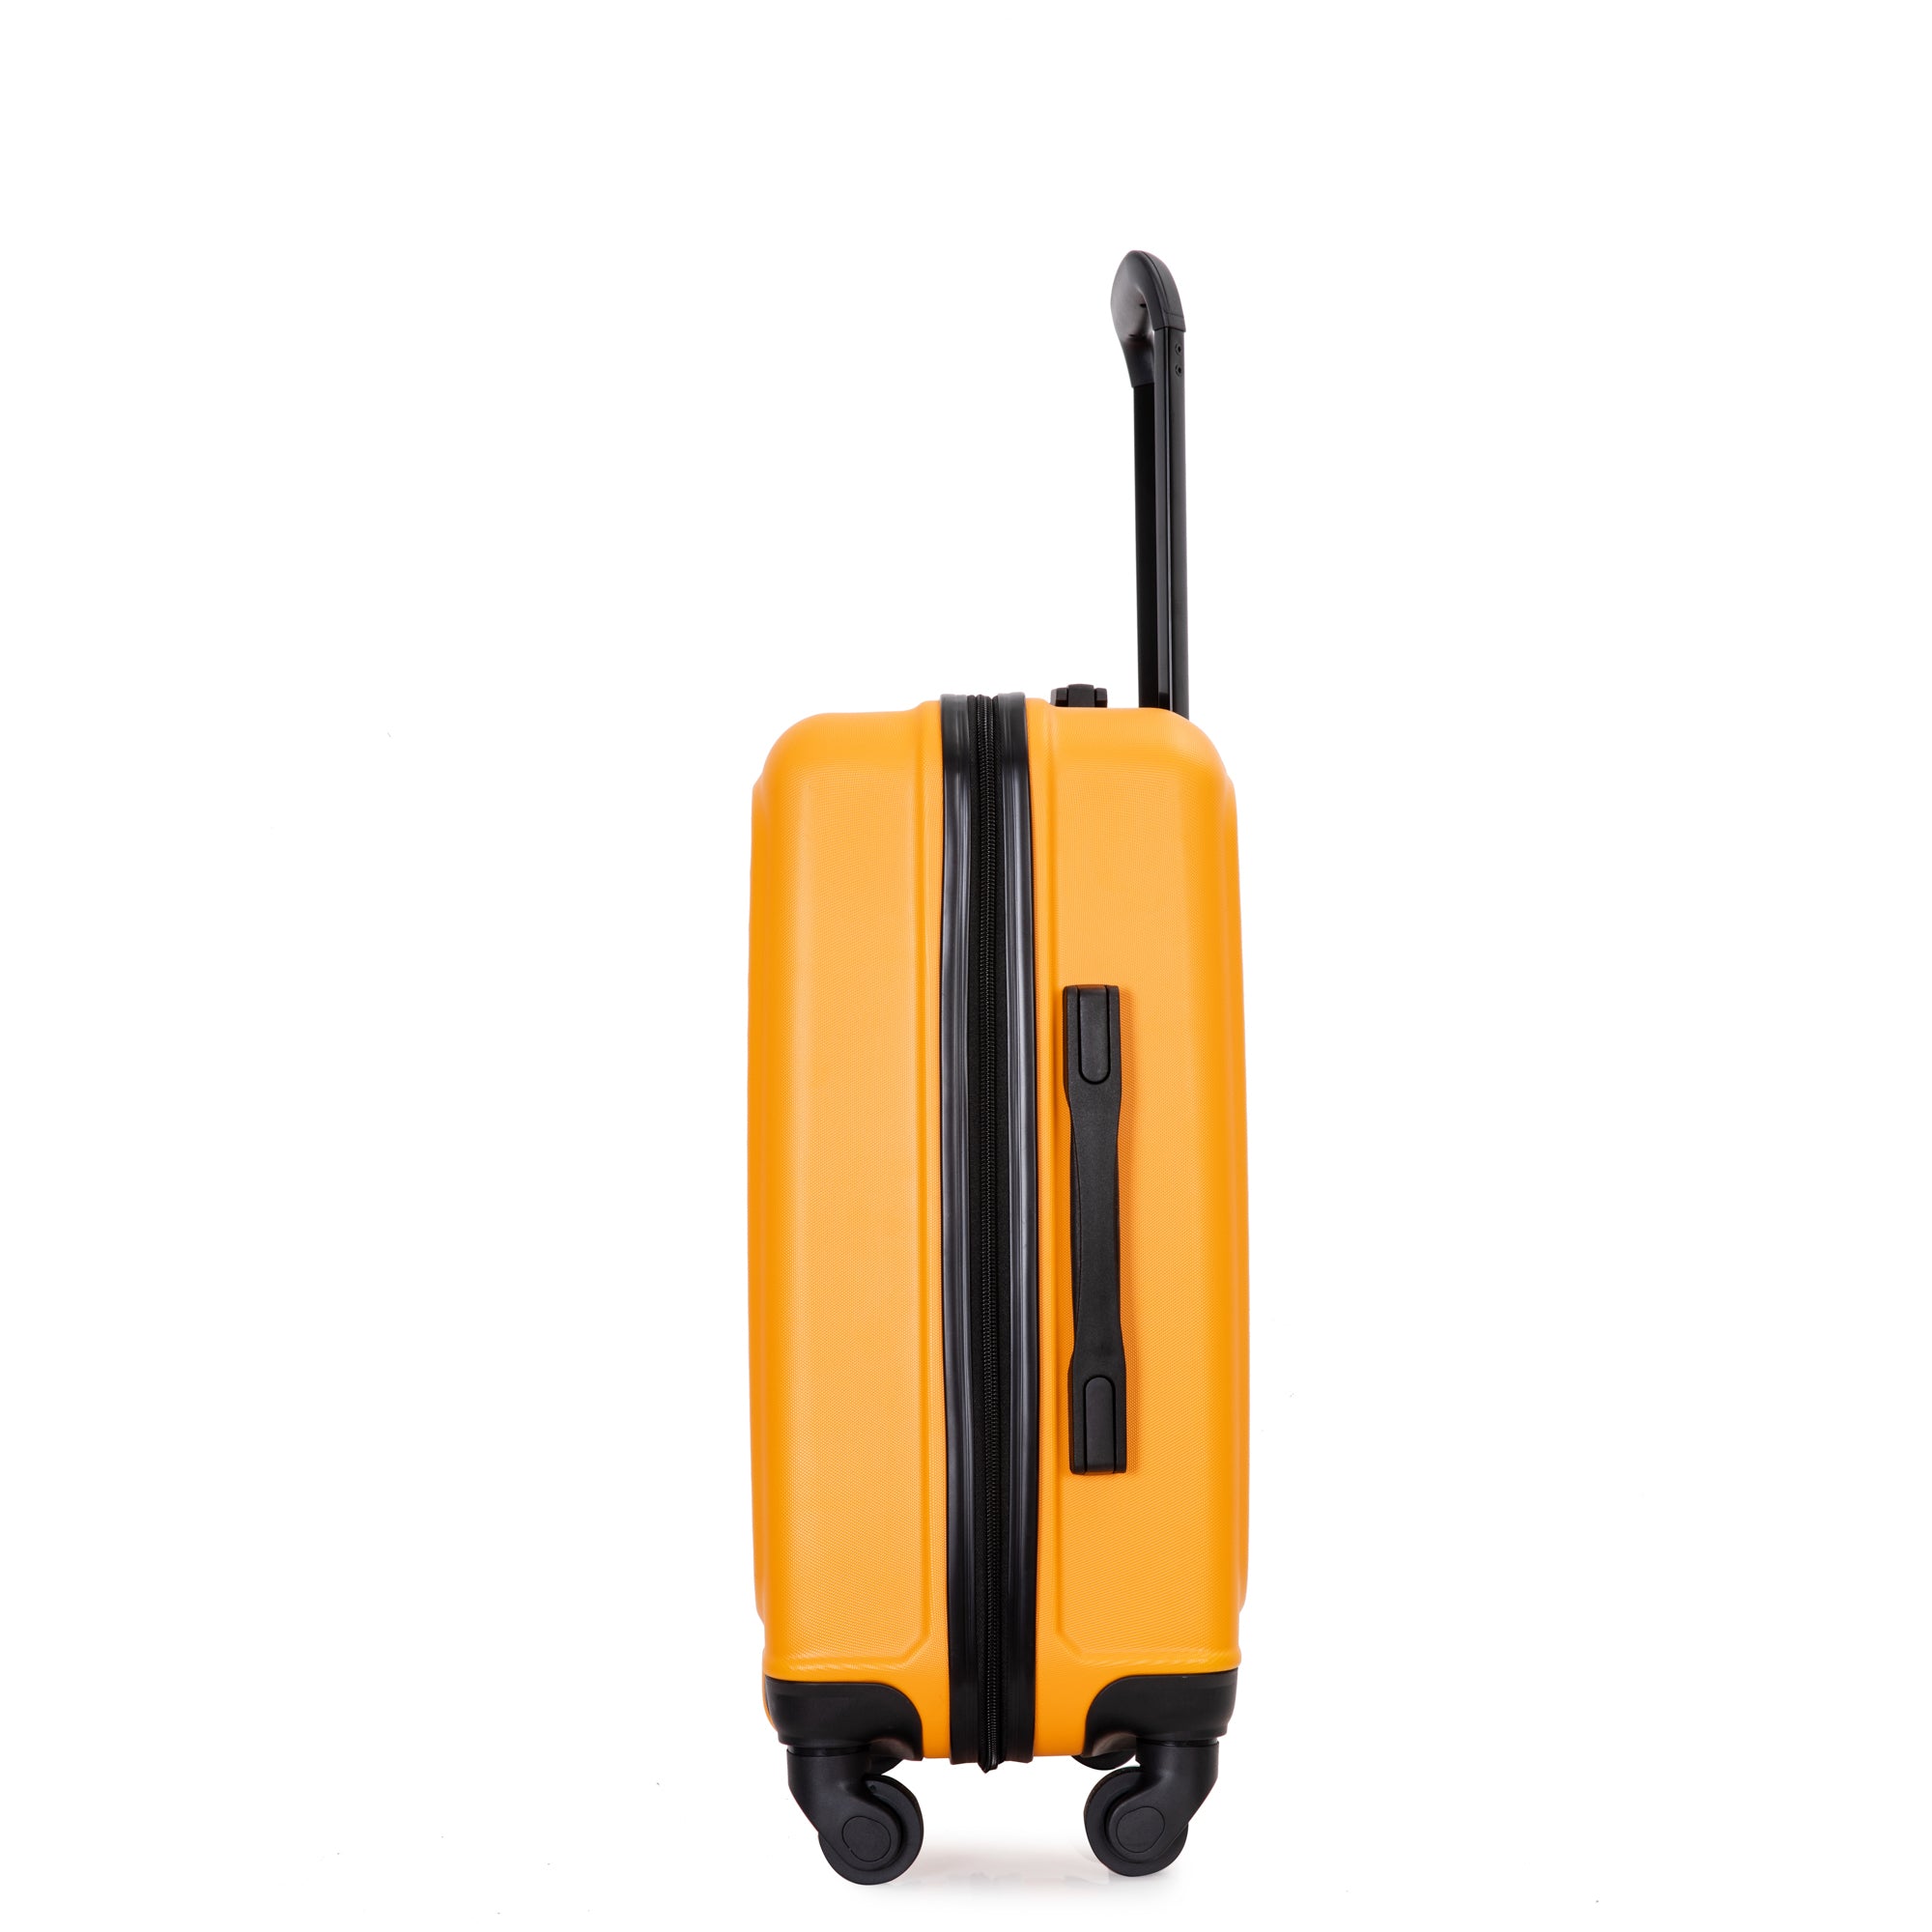 20" Carry on Luggage Lightweight Suitcase, Spinner orange-abs